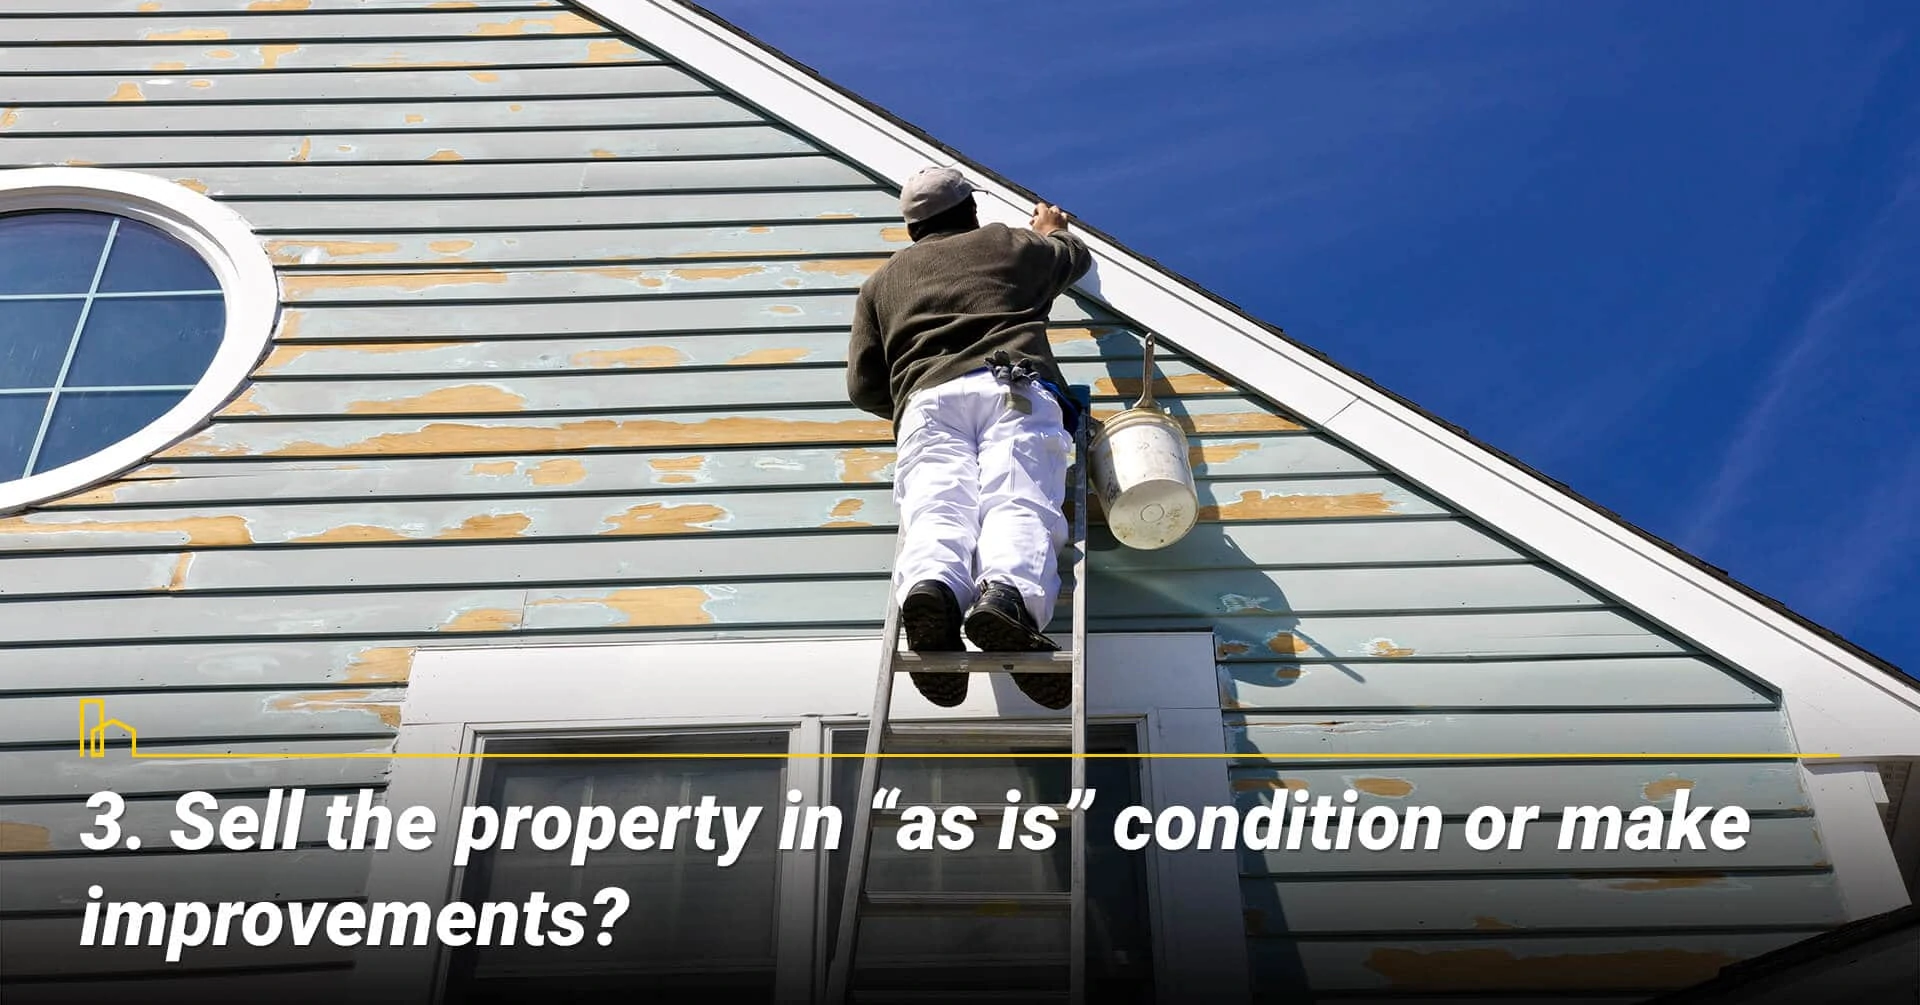 Sell the property in “as is” condition or make improvements? Sell your property in what condition